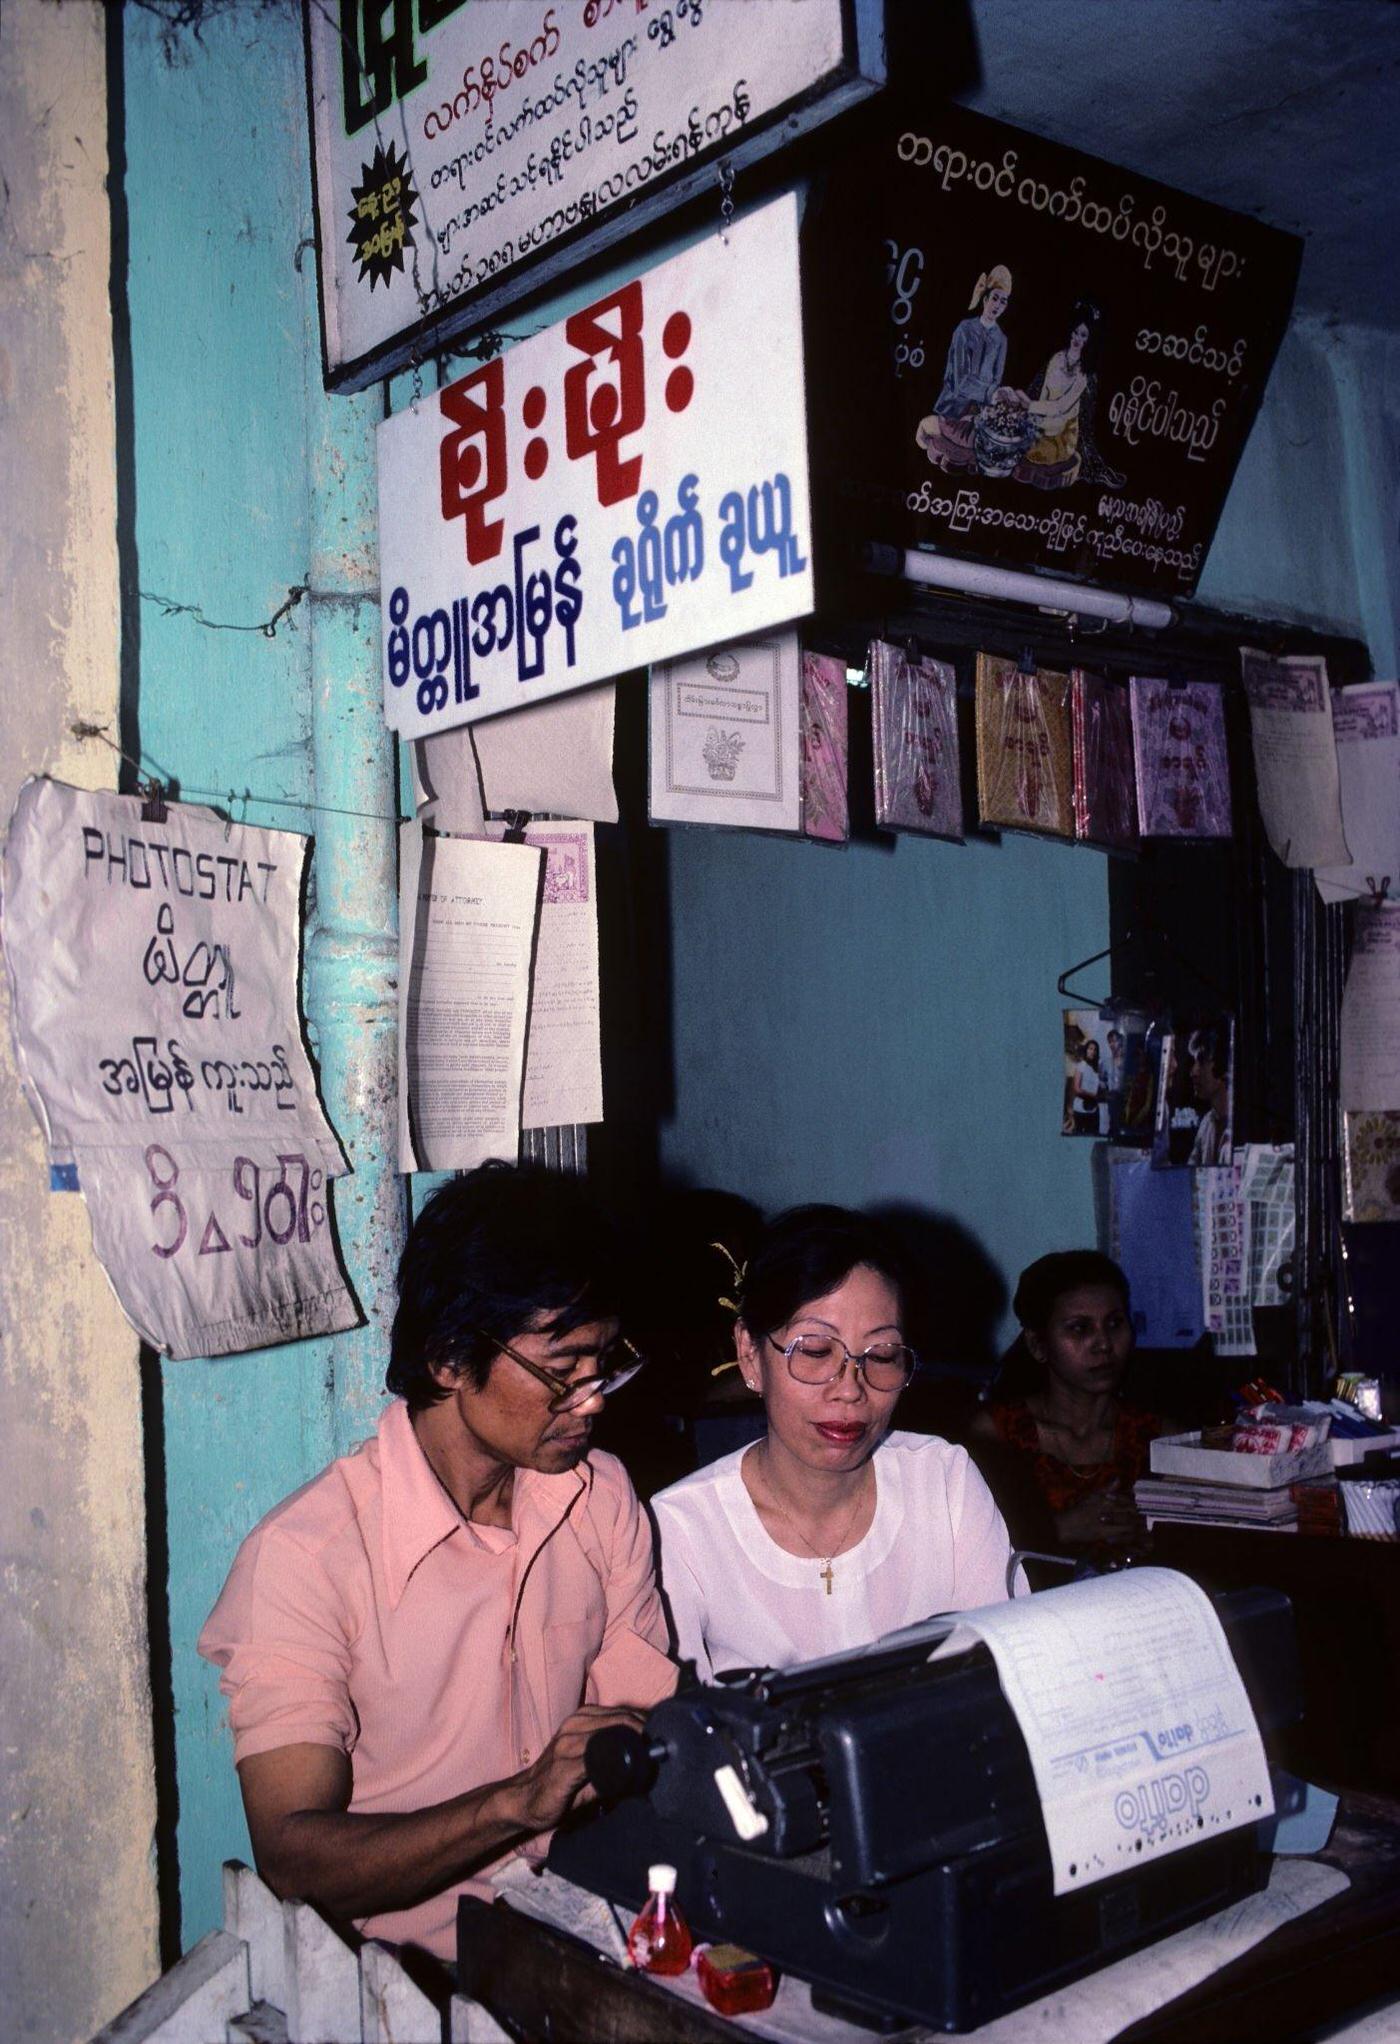 Notary Public Types Official Document for a Client on Merchant Road, Rangoon, 1985